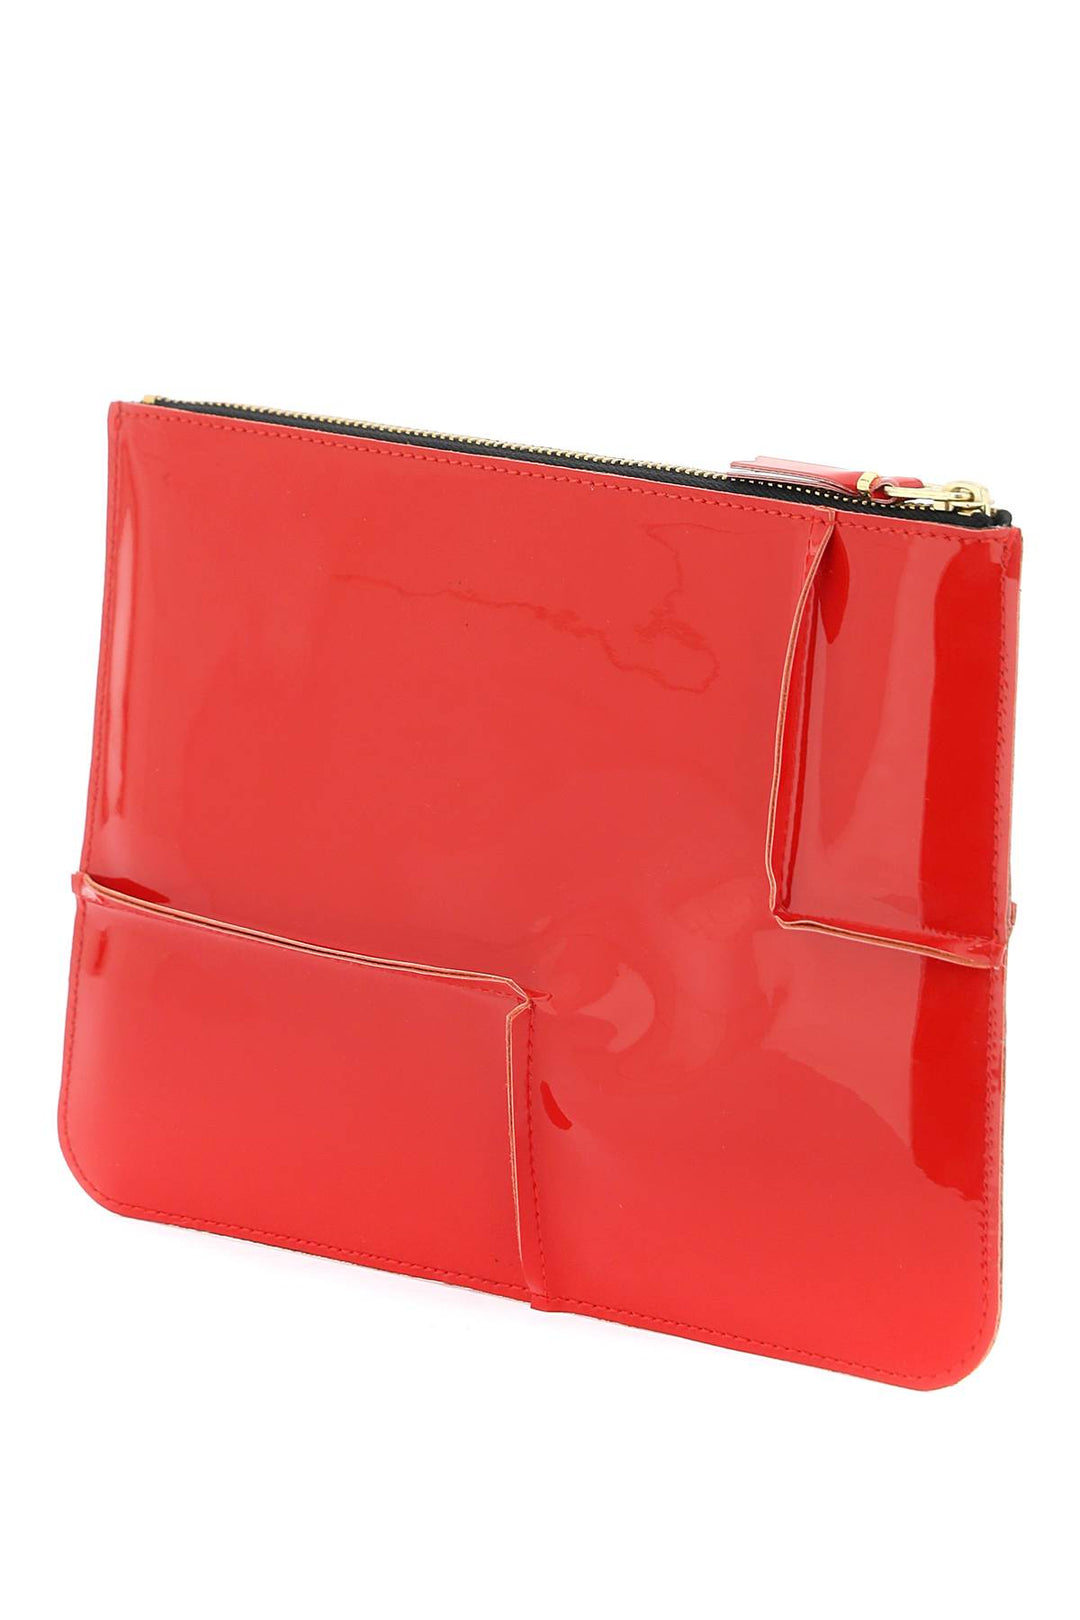 Comme Des Garcons Wallet Glossy Patent Leather   Rosso